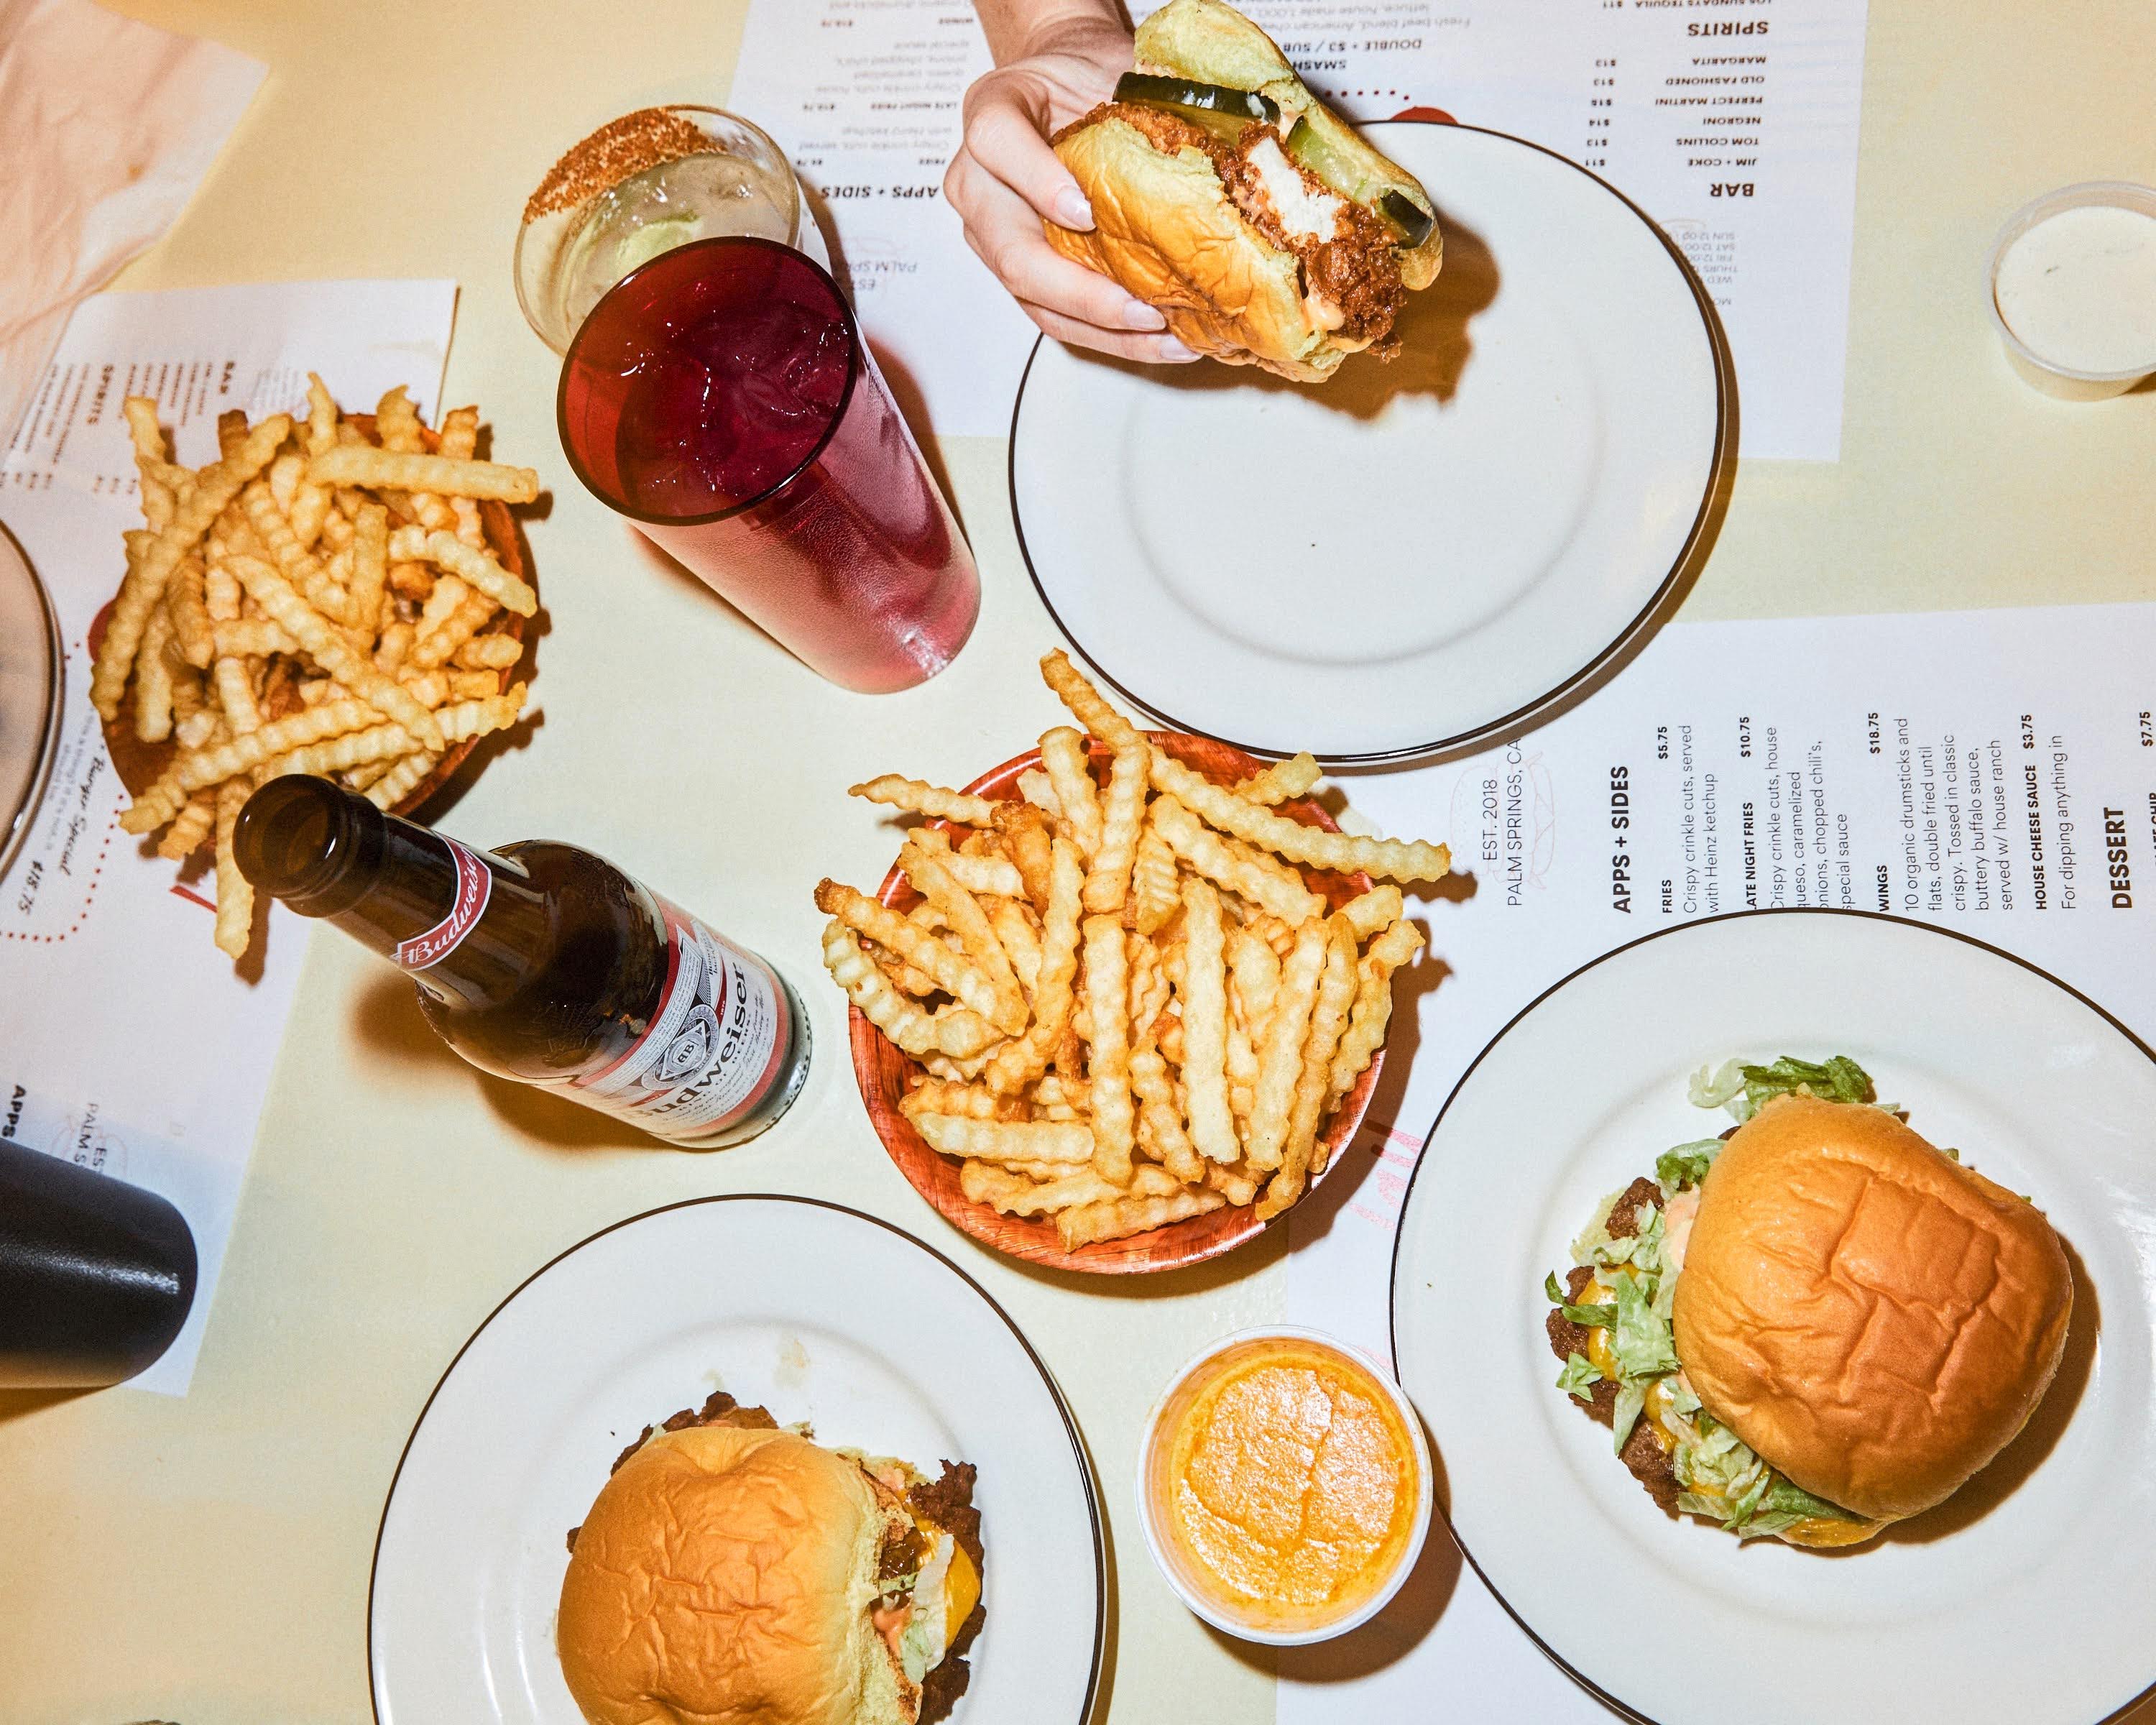 Burgers, beer, dipping sauces, and fries at The Heyday restaurant in Palm Springs.